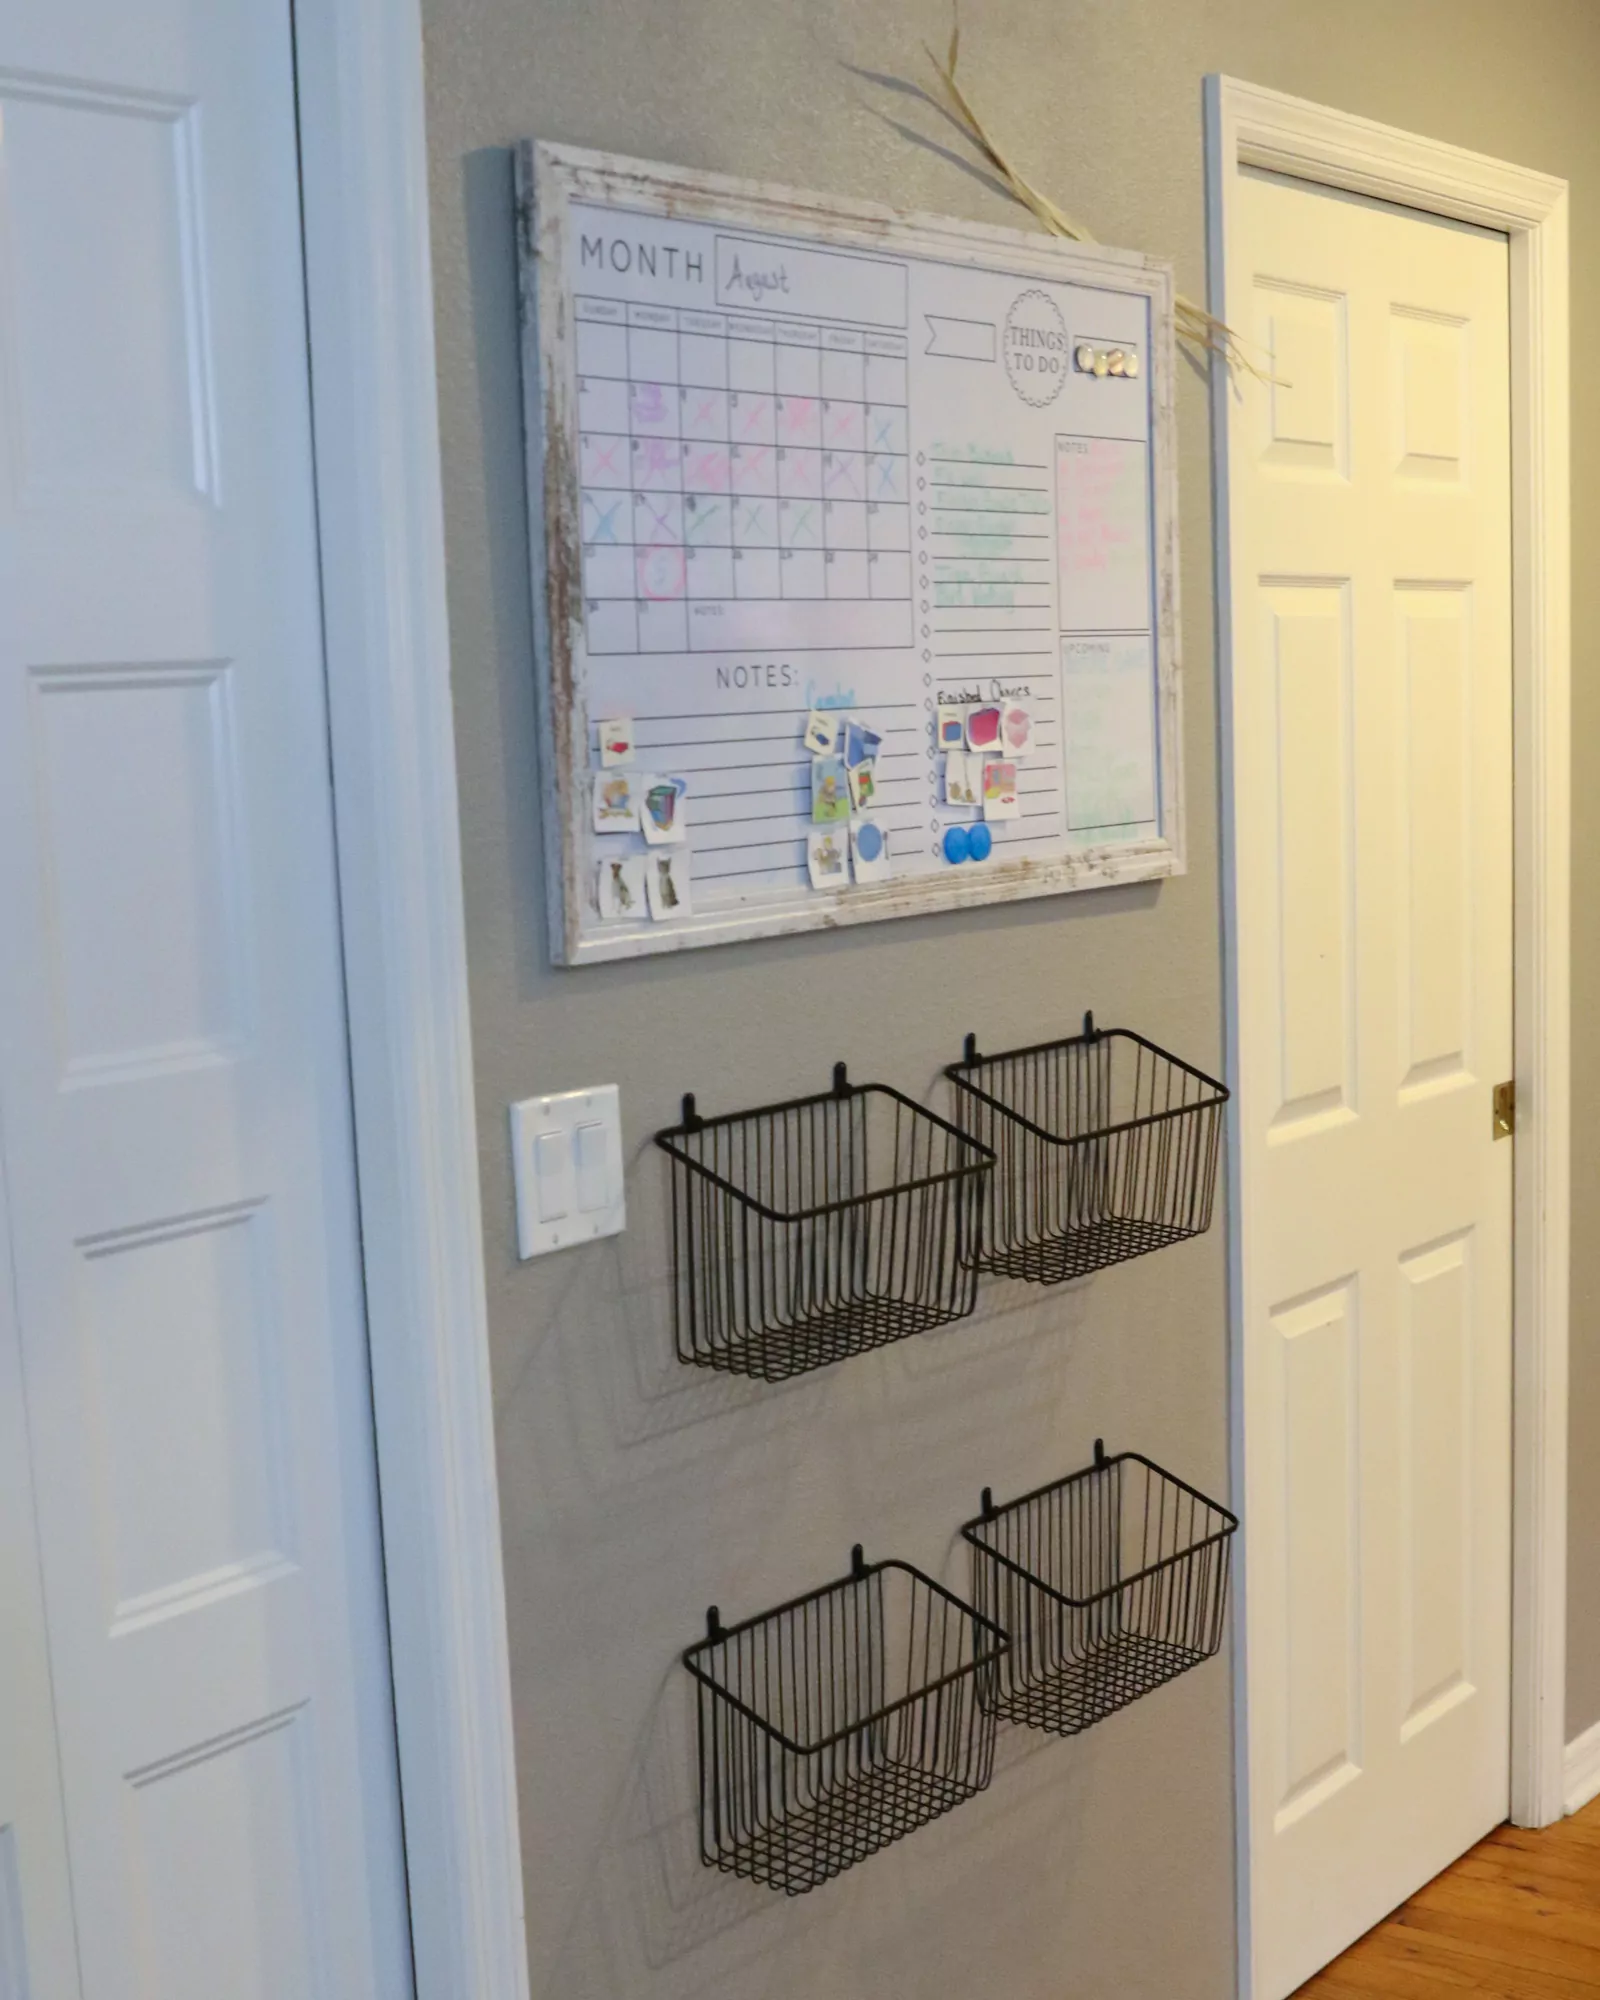 Have a family routine organizer (like this calendar and baskets) and a drop off zone for backpacks for an easier morning routine